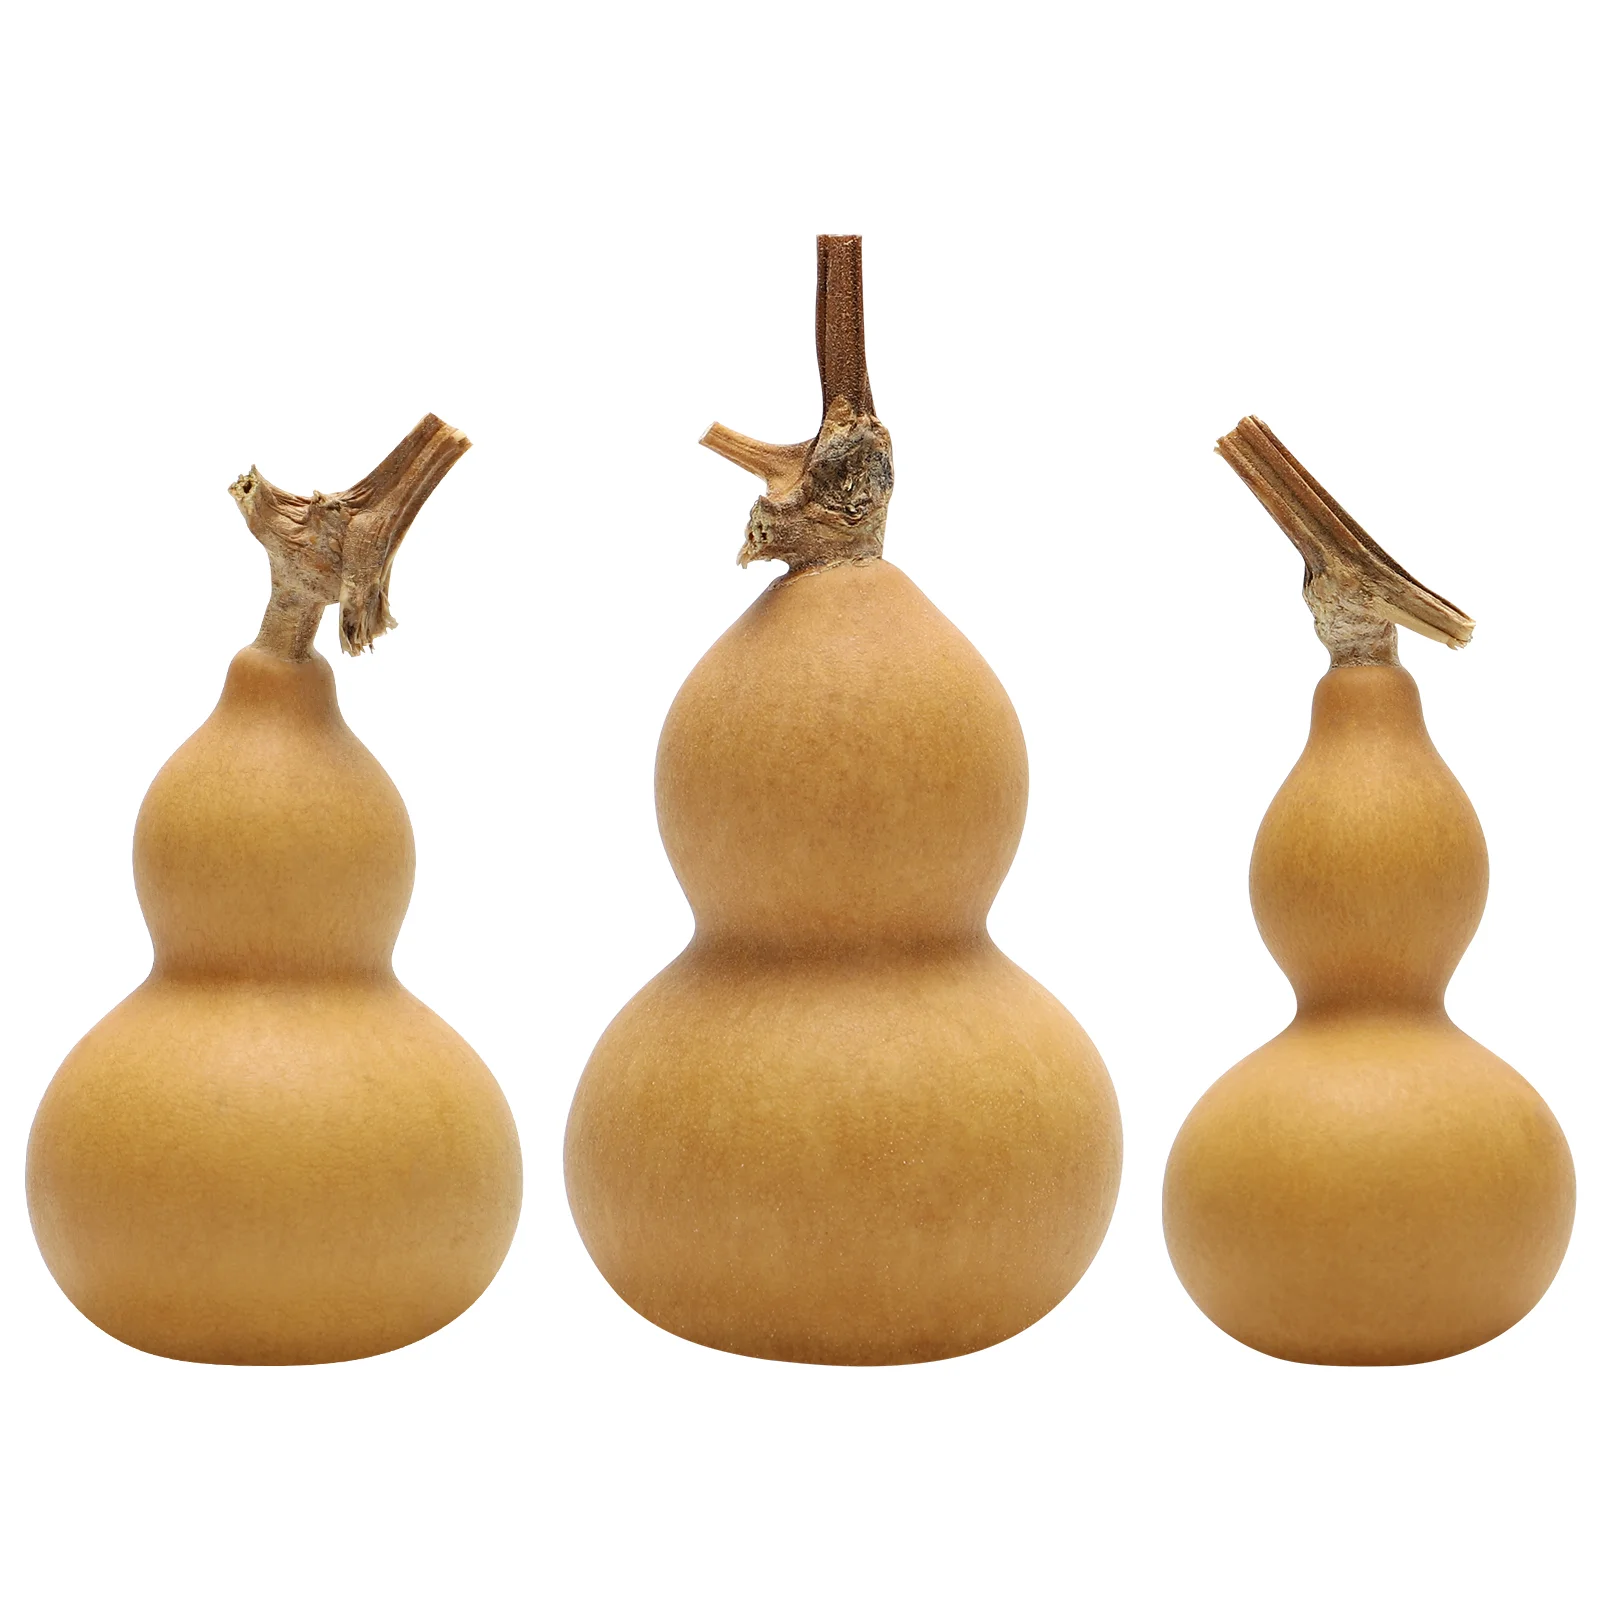 

Gourd Natural Gourds Decorornament Dried Chinese Desk Crafts Drinking Decorations Home Desktop Bottle Decoration Dry Ornaments